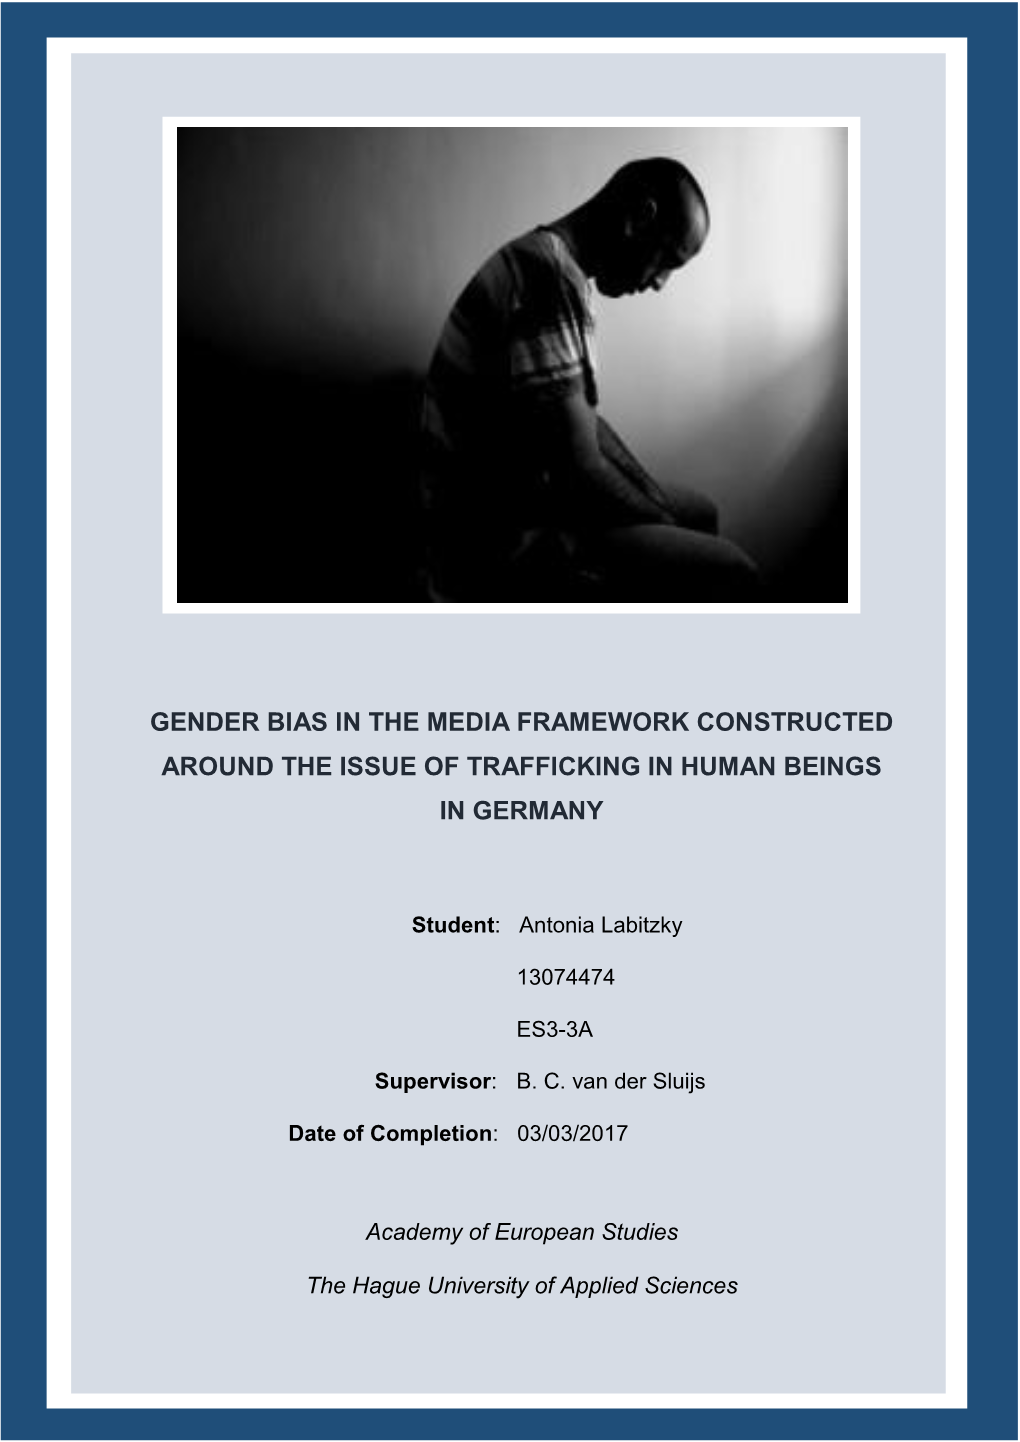 Gender Bias in the Media Framework Constructed Around the Issue of Trafficking in Human Beings in Germany